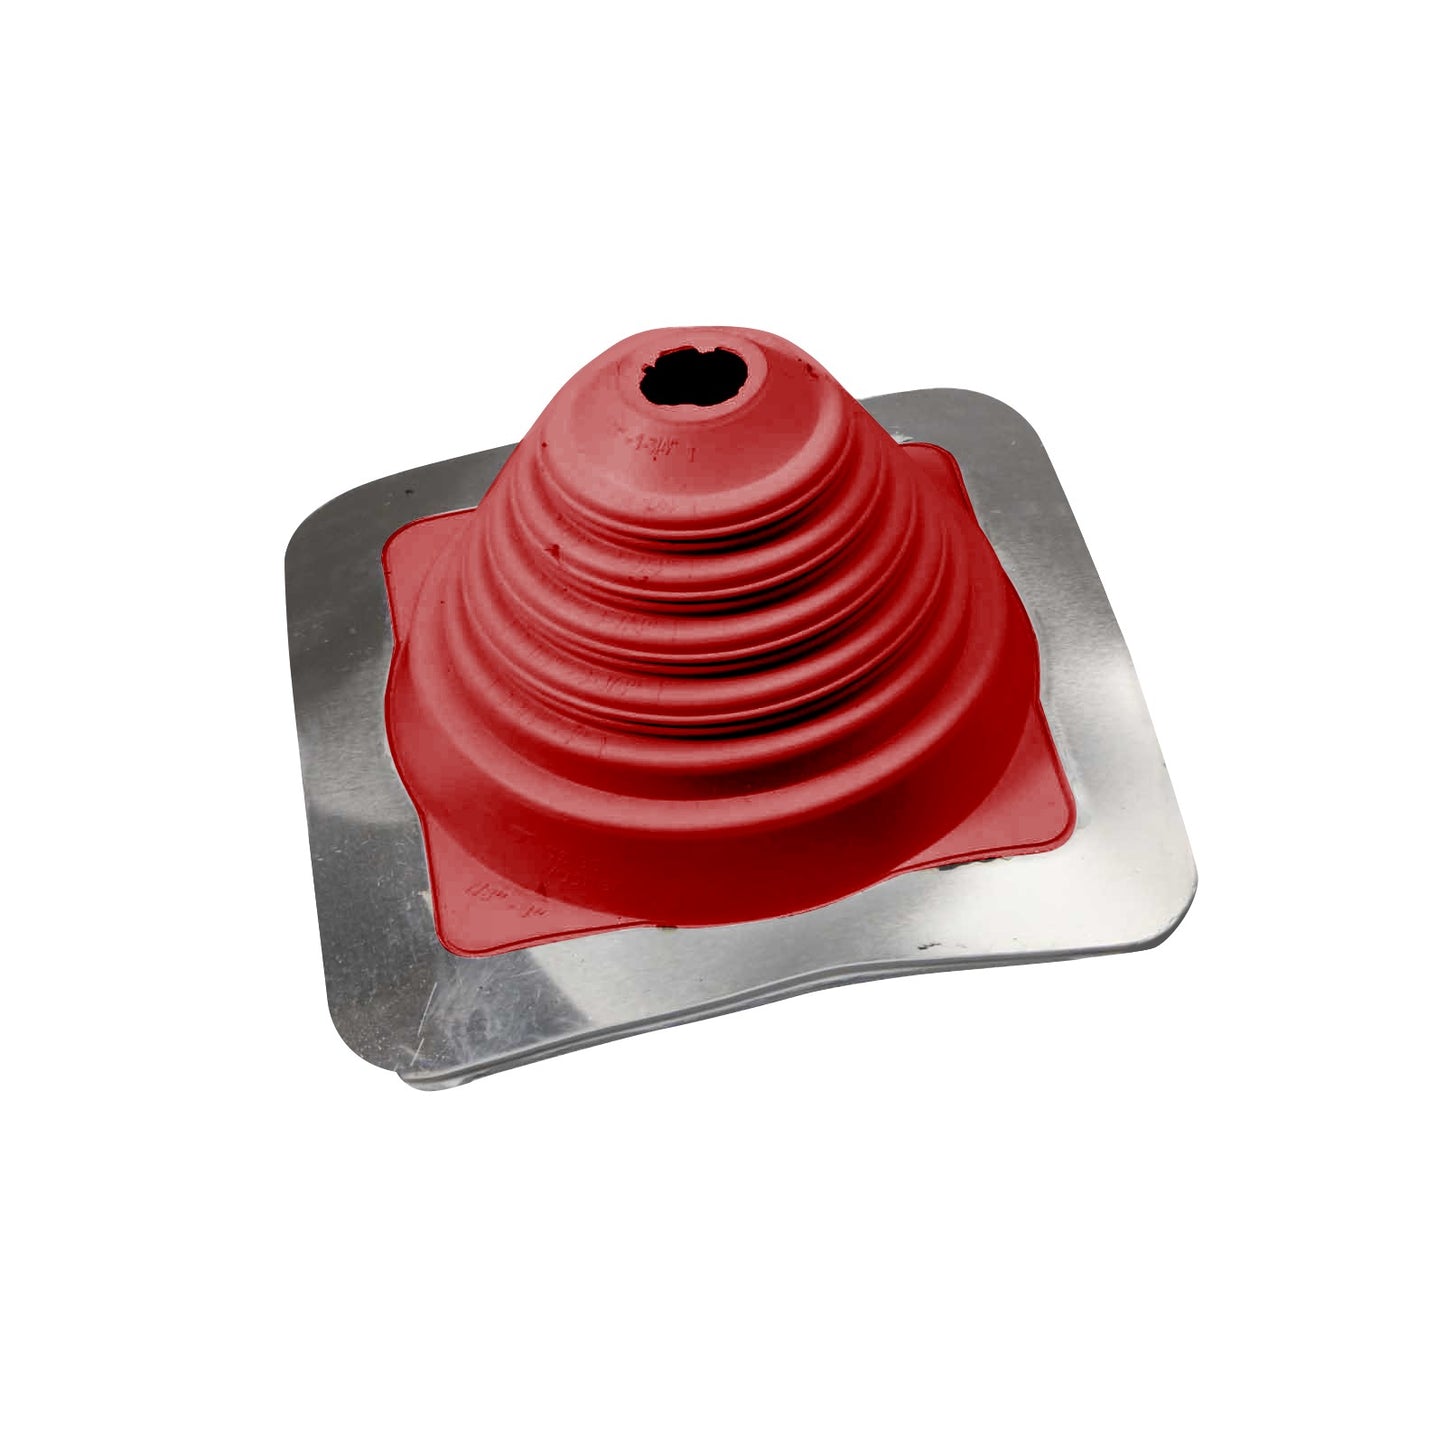 #2 Roofjack Square EPDM Pipe Flashing Boot Bright Red